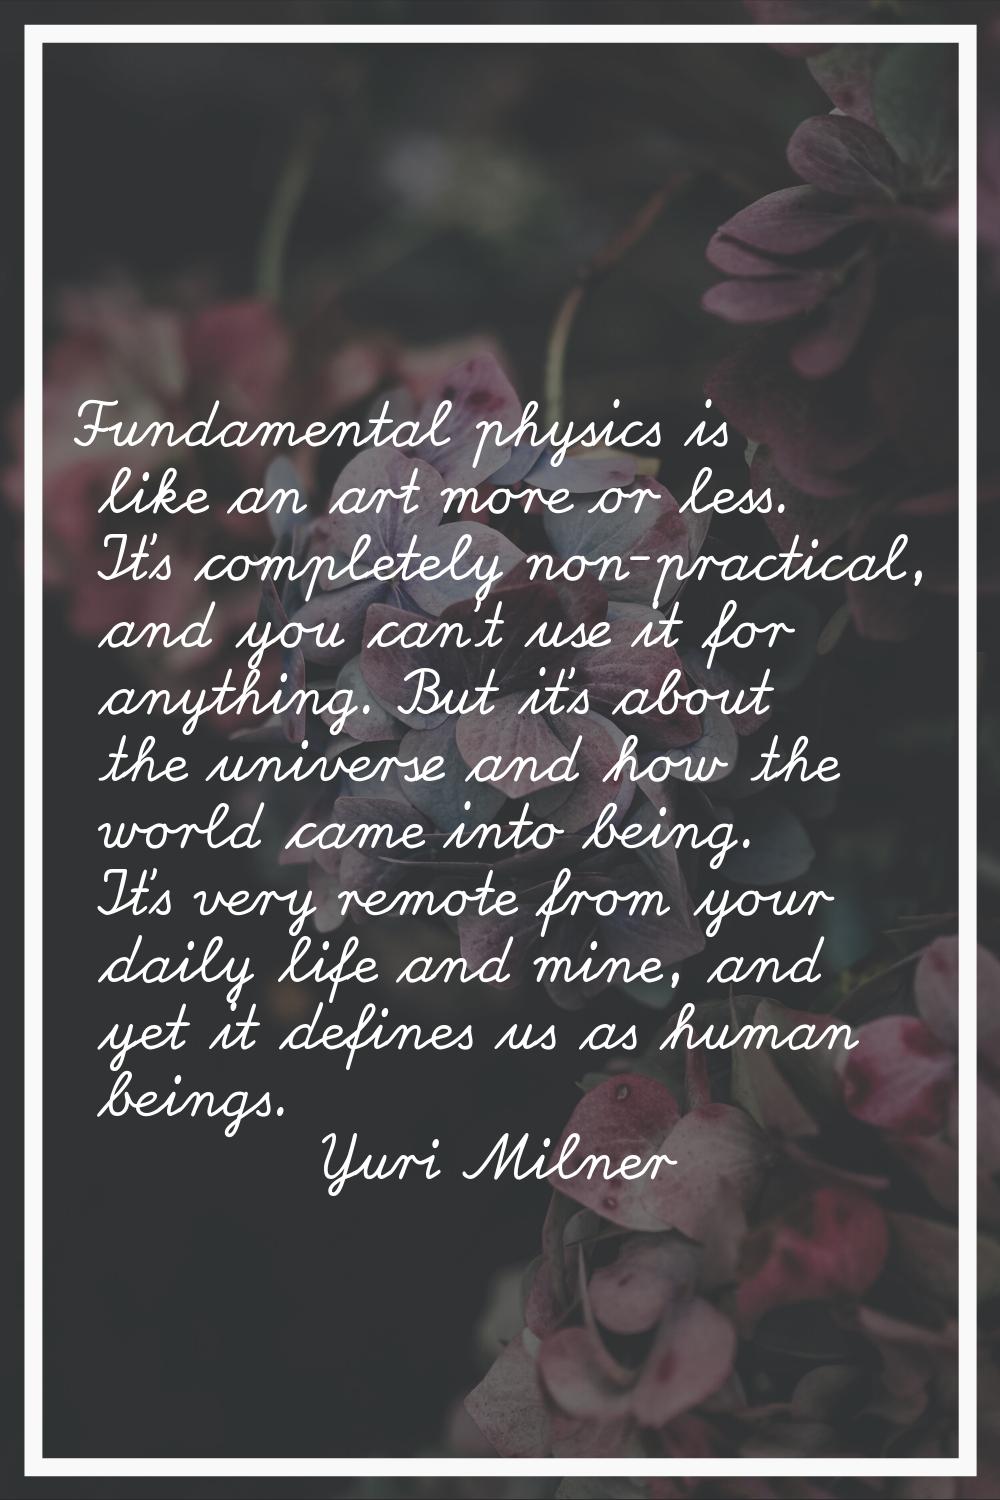 Fundamental physics is like an art more or less. It's completely non-practical, and you can't use i